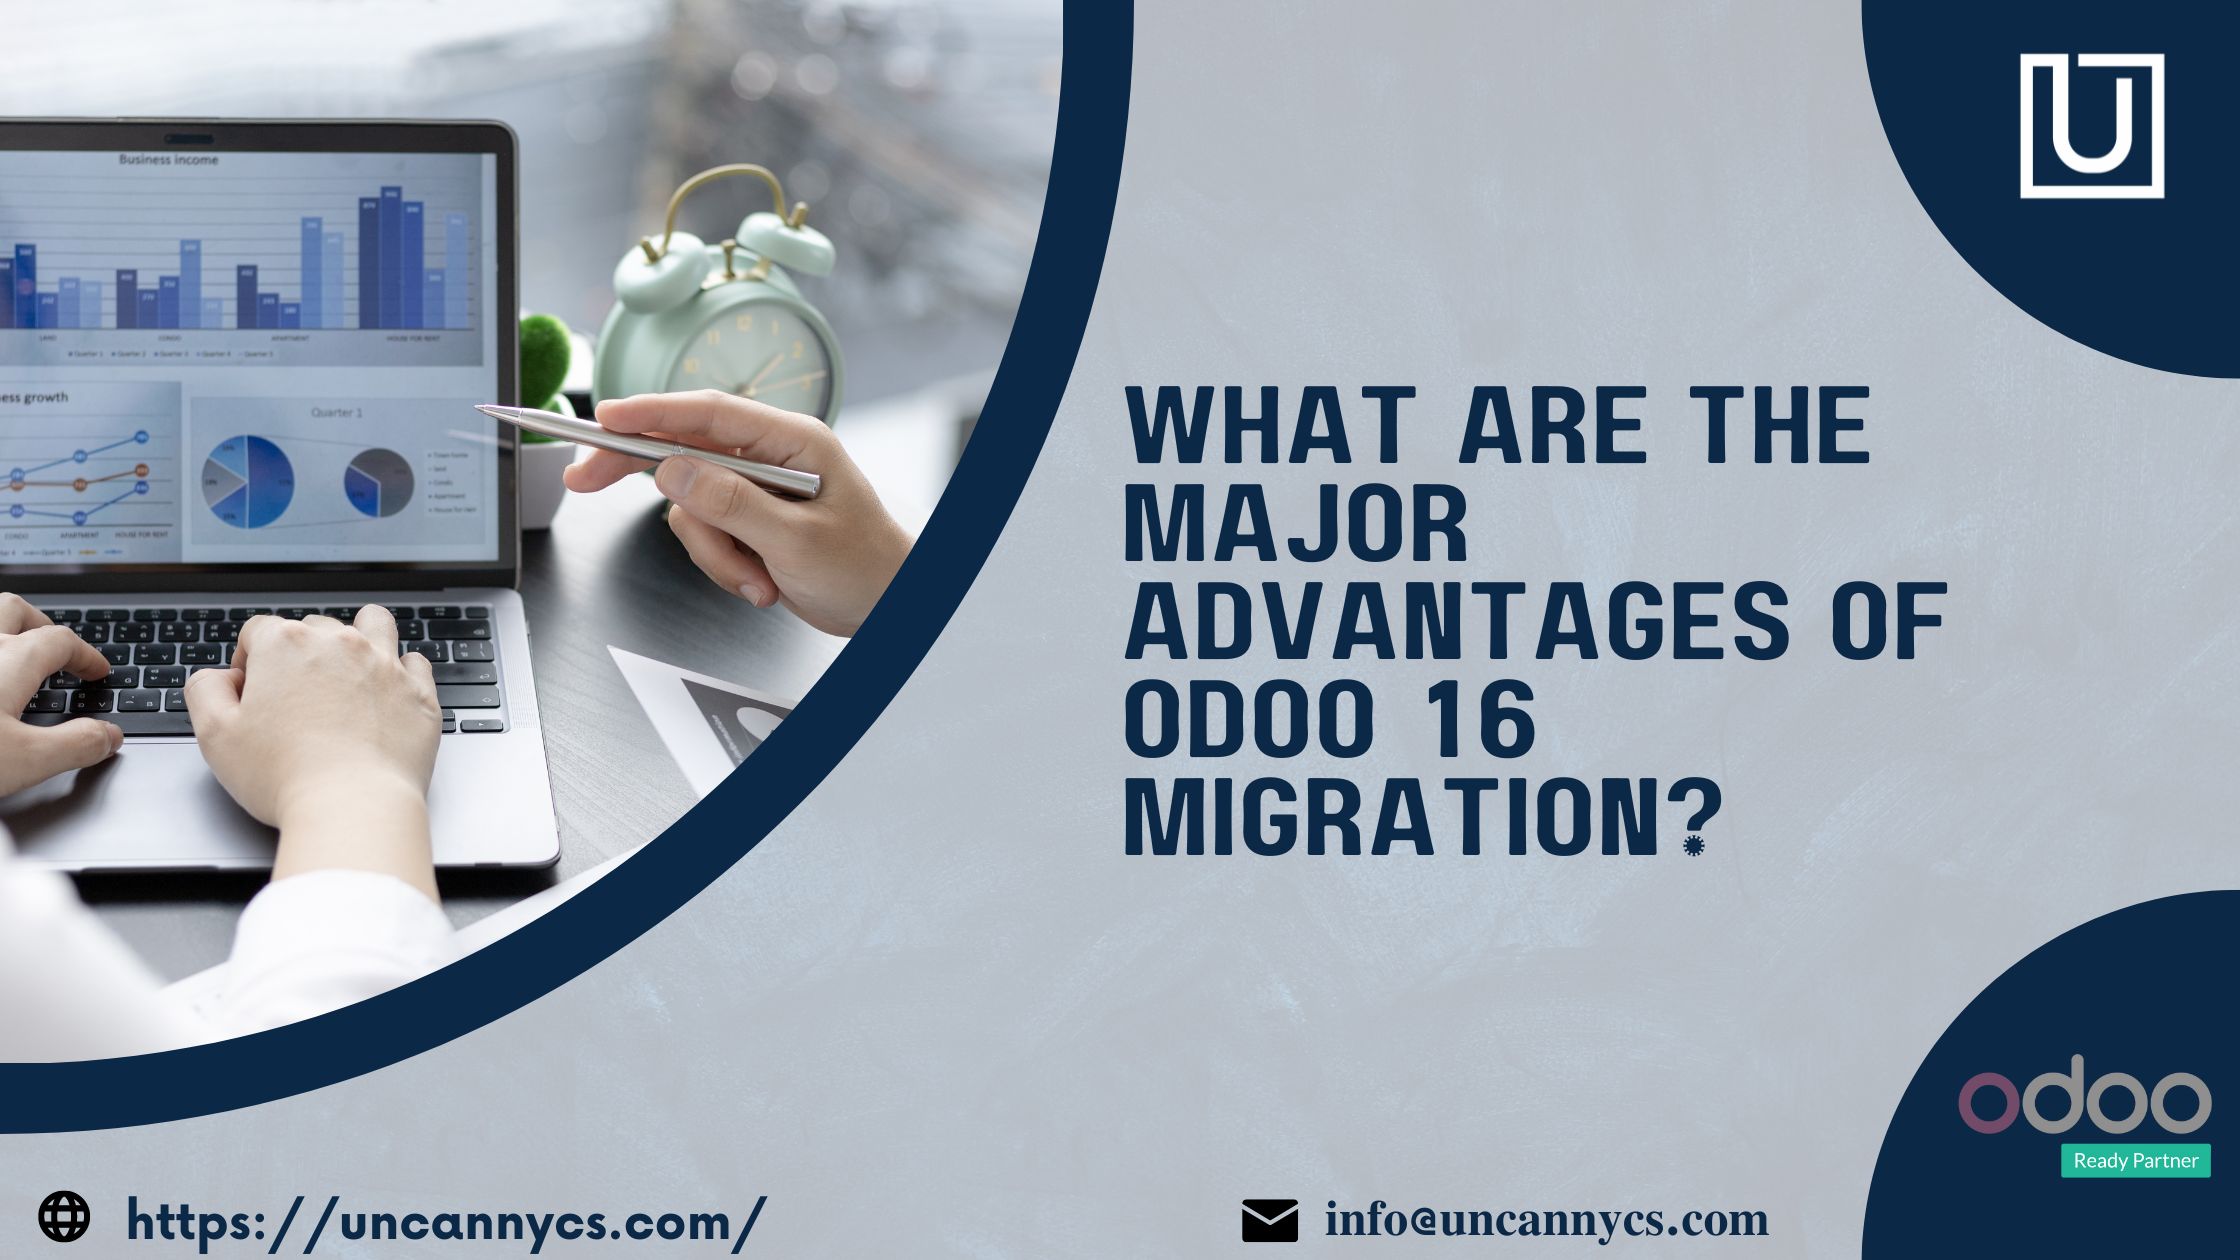 What are the major advantages of Odoo 16 Migration?